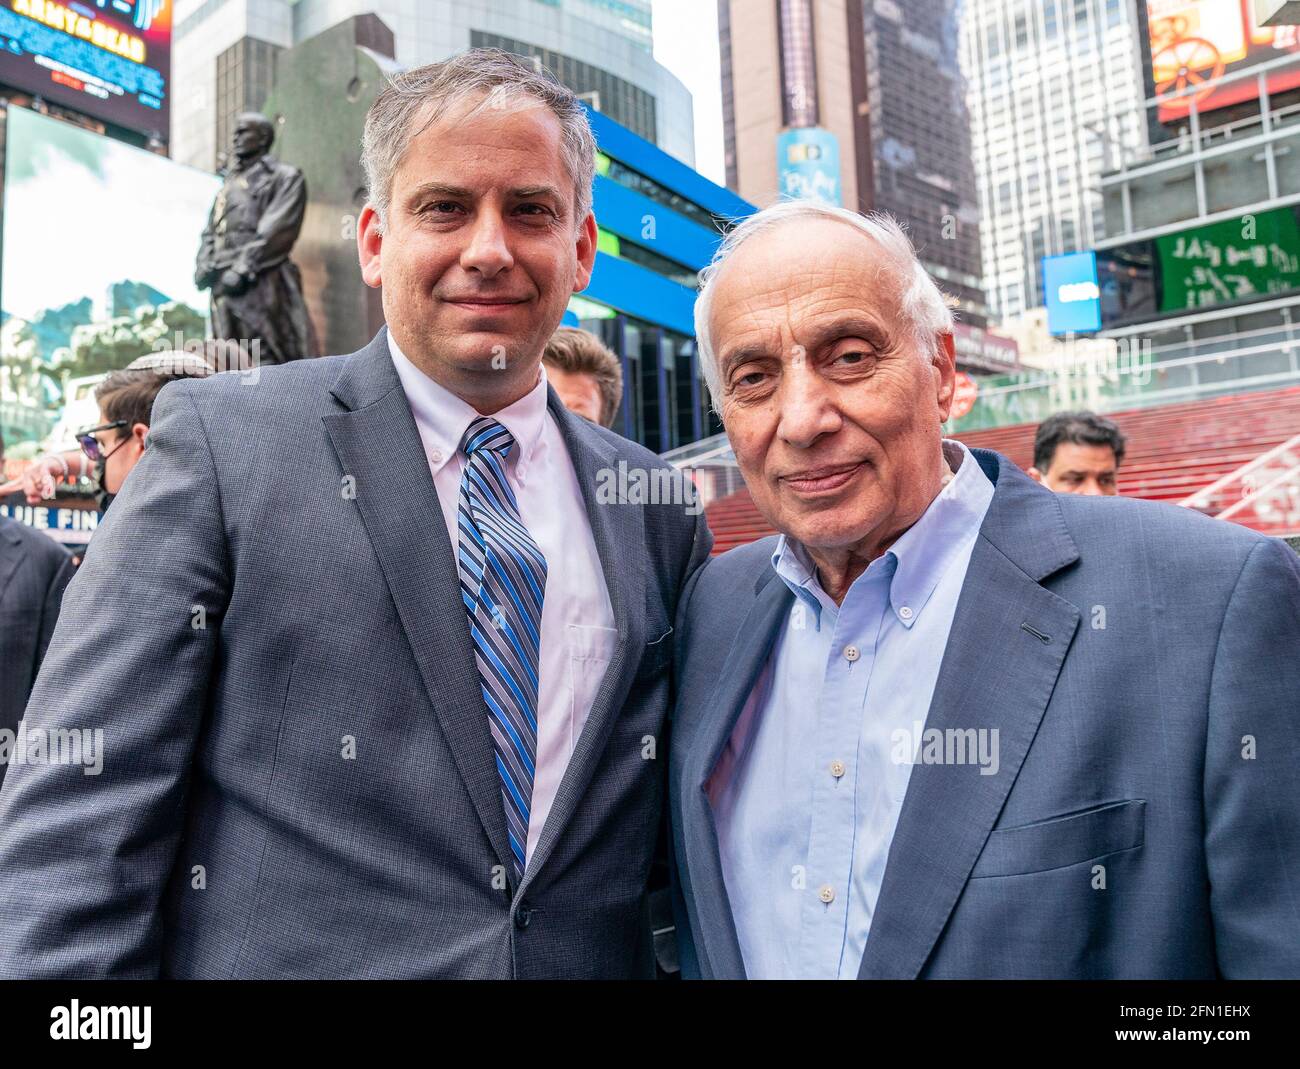 New York, United States. 12th May, 2021. Acting Consul General Israel Nitzan and Rabbi Avi Weiss attend rally in support of Israel stragles against Palestinian terrorists on Times Square. More than 200 hundred supporters came for the rally. Protesters rally against the HAMAS organization responsible for firing hundreds of rockets into civilian targets inside Israel. (Photo by Lev Radin/Pacific Press) Credit: Pacific Press Media Production Corp./Alamy Live News Stock Photo